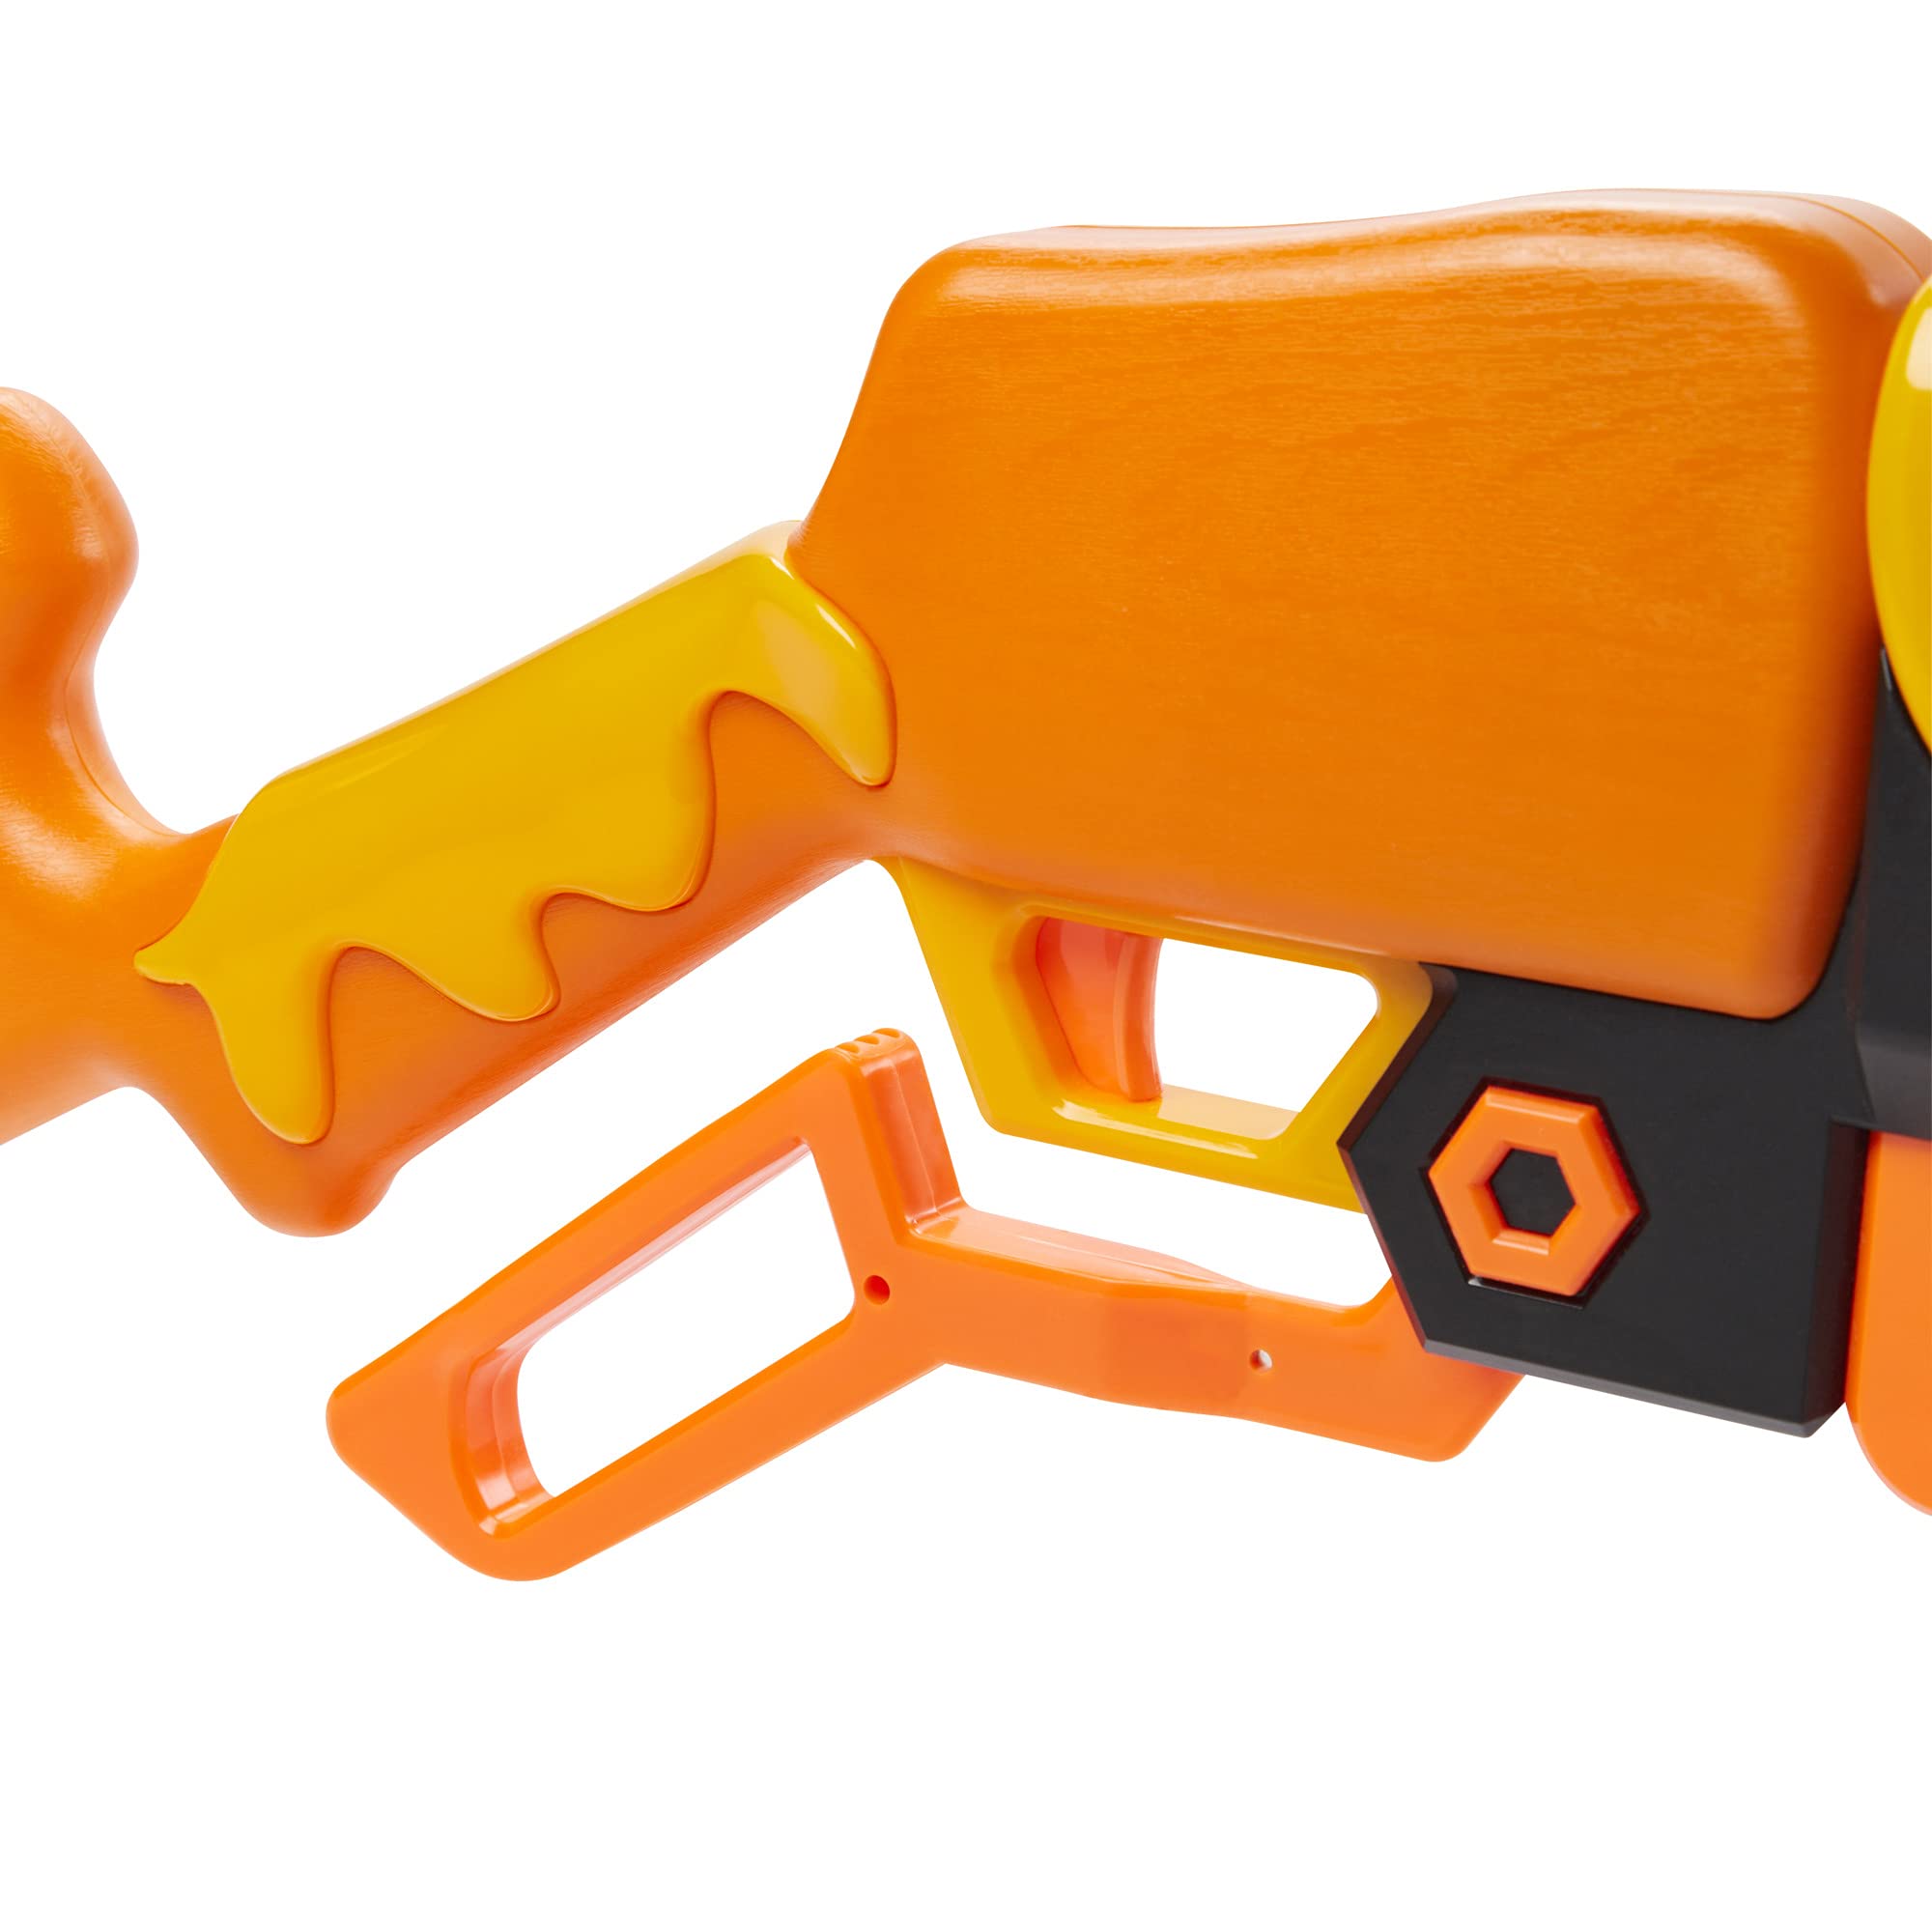 Nerf Roblox Adopt Me: Bees Lever Action Blaster, 8 Elite Darts, Code to Unlock in-Game Virtual Item